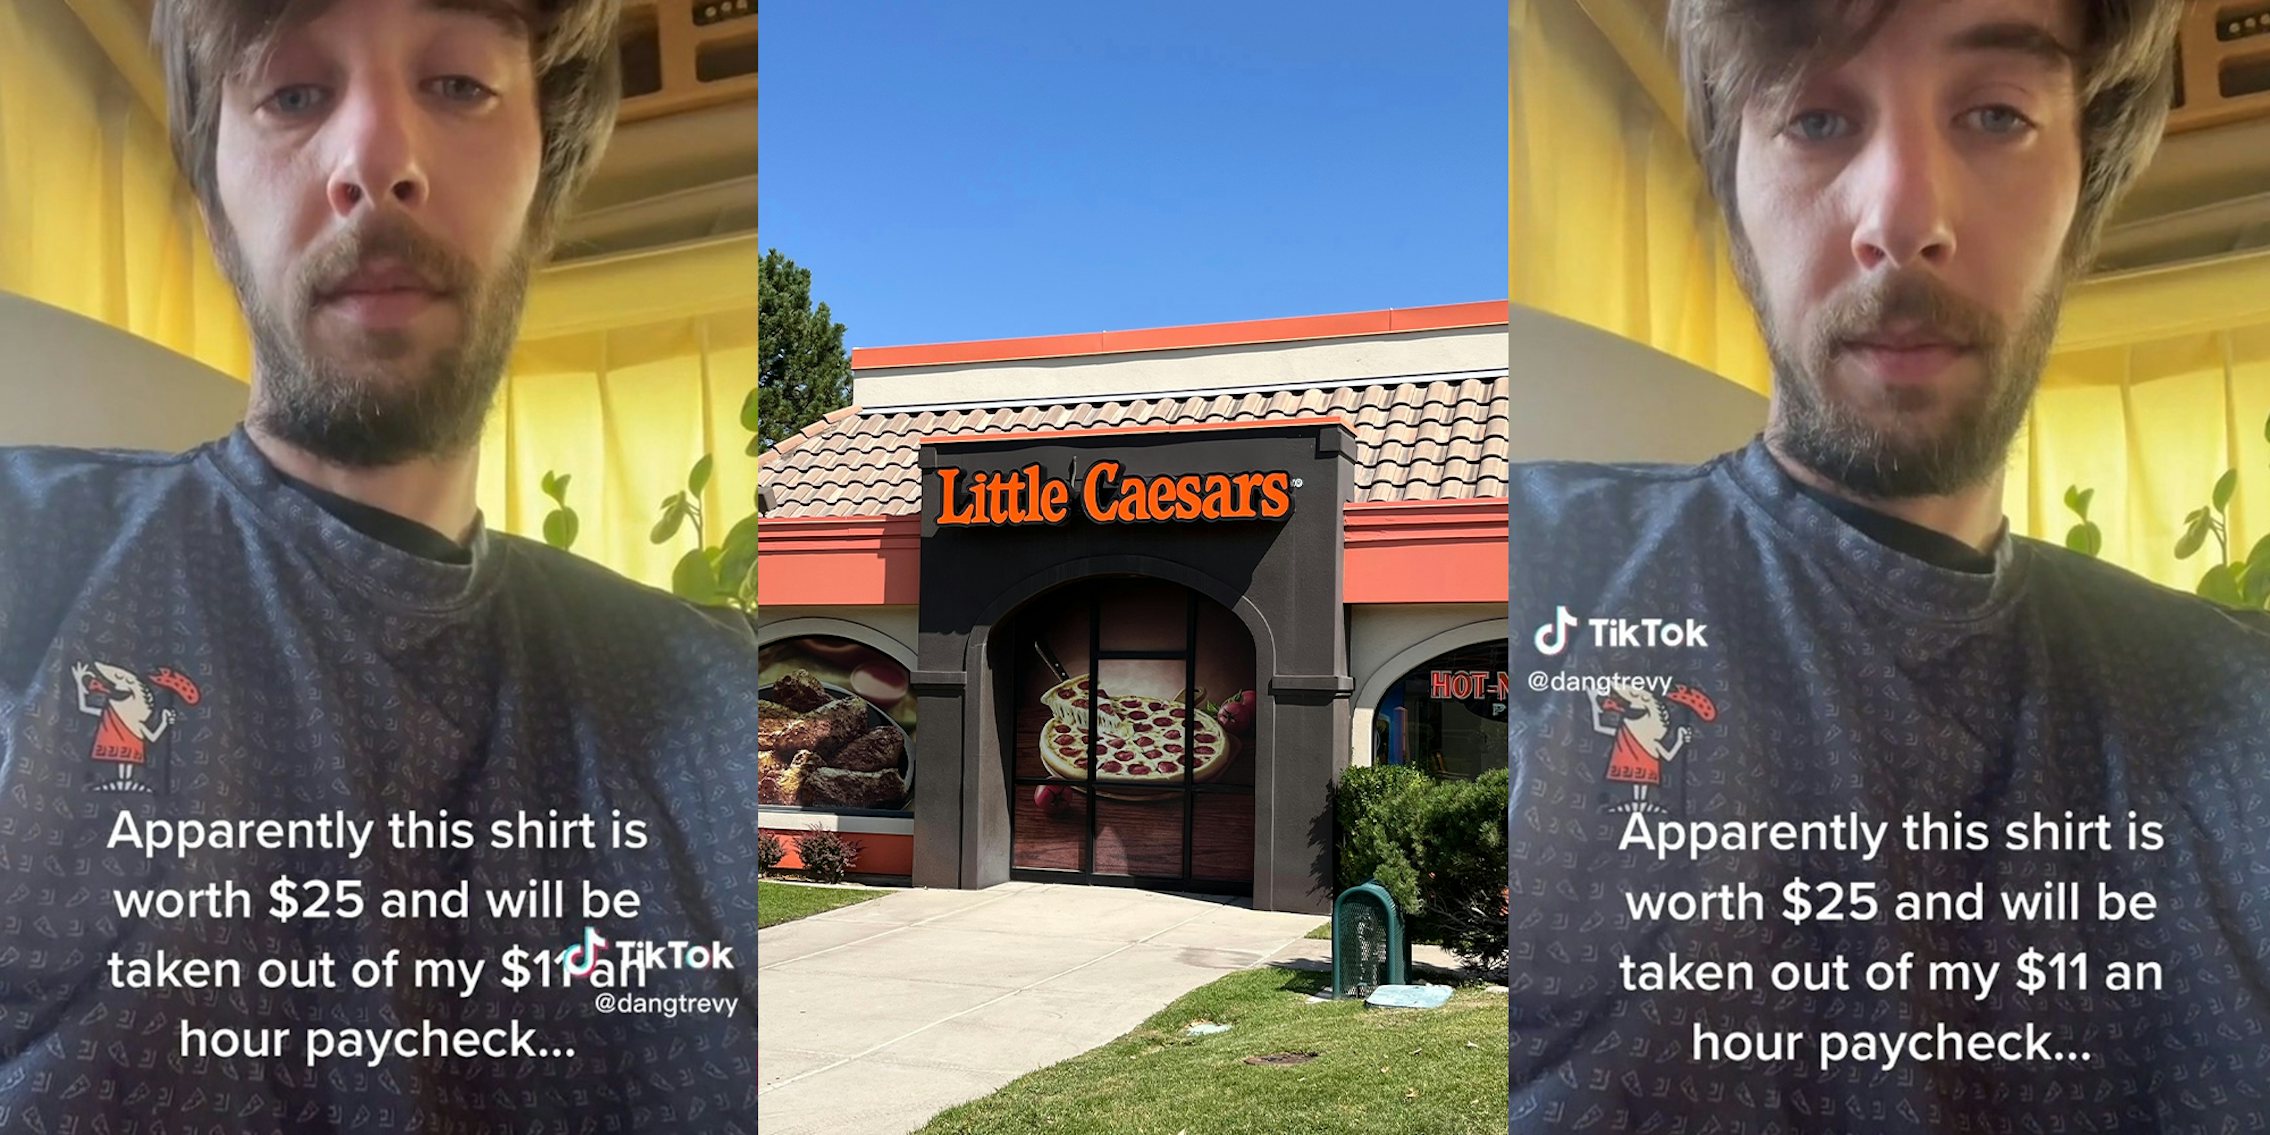 Little Caesars worker says uniform shirt will be taken out of his paycheck